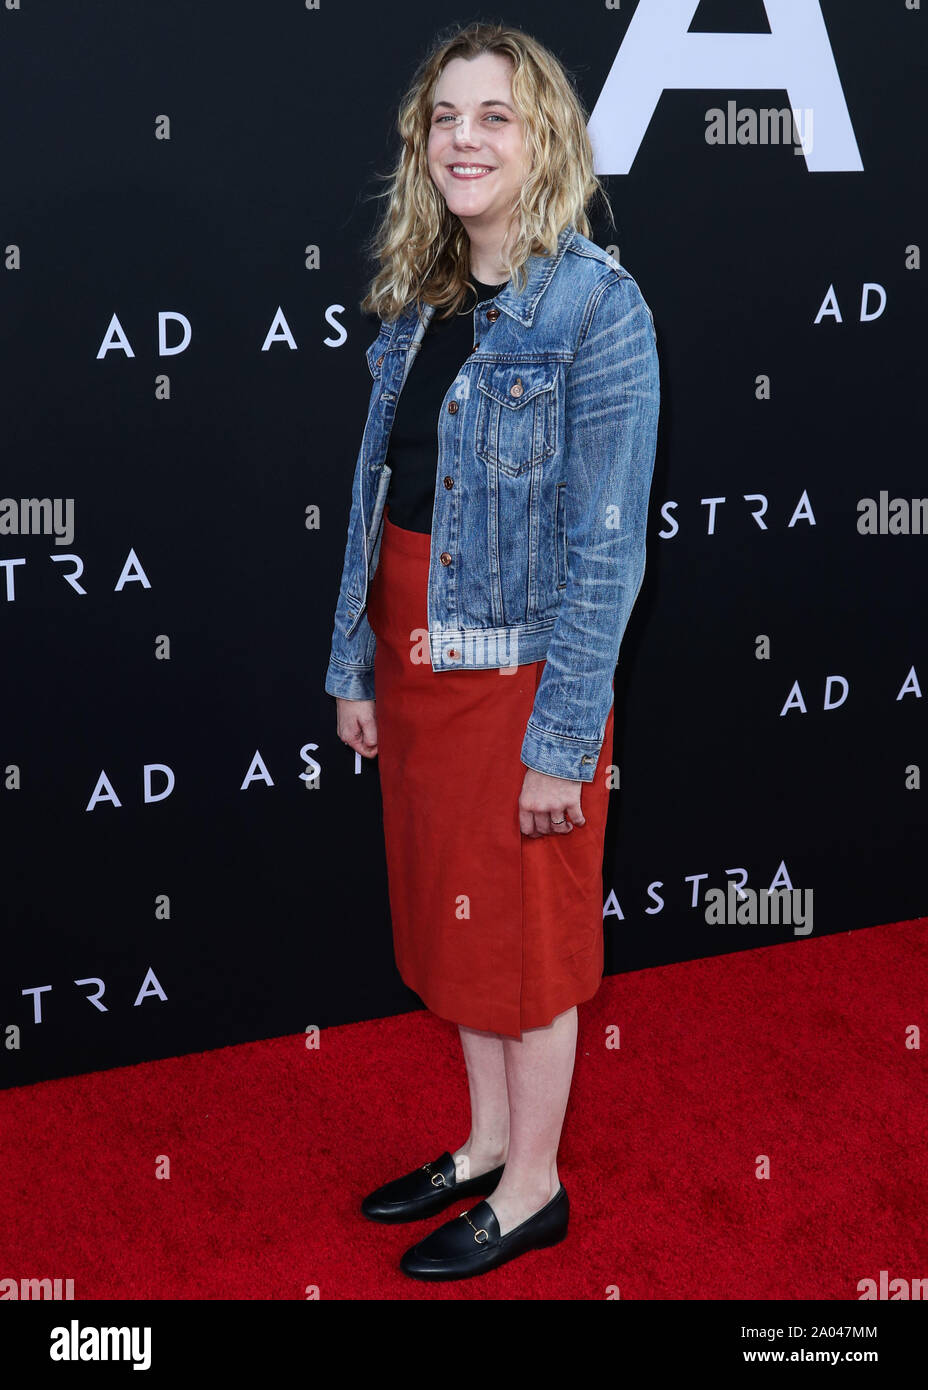 Hollywood, United States. 18th Sep, 2019. HOLLYWOOD, LOS ANGELES, CALIFORNIA, USA - SEPTEMBER 18: Stephany Folsom arrives at the Los Angeles Premiere Of 20th Century Fox's 'Ad Astra' held at ArcLight Cinemas Hollywood Cinerama Dome on August 18, 2019 in Hollywood, Los Angeles, California, United States. (Photo by Xavier Collin/Image Press Agency) Credit: Image Press Agency/Alamy Live News Stock Photo